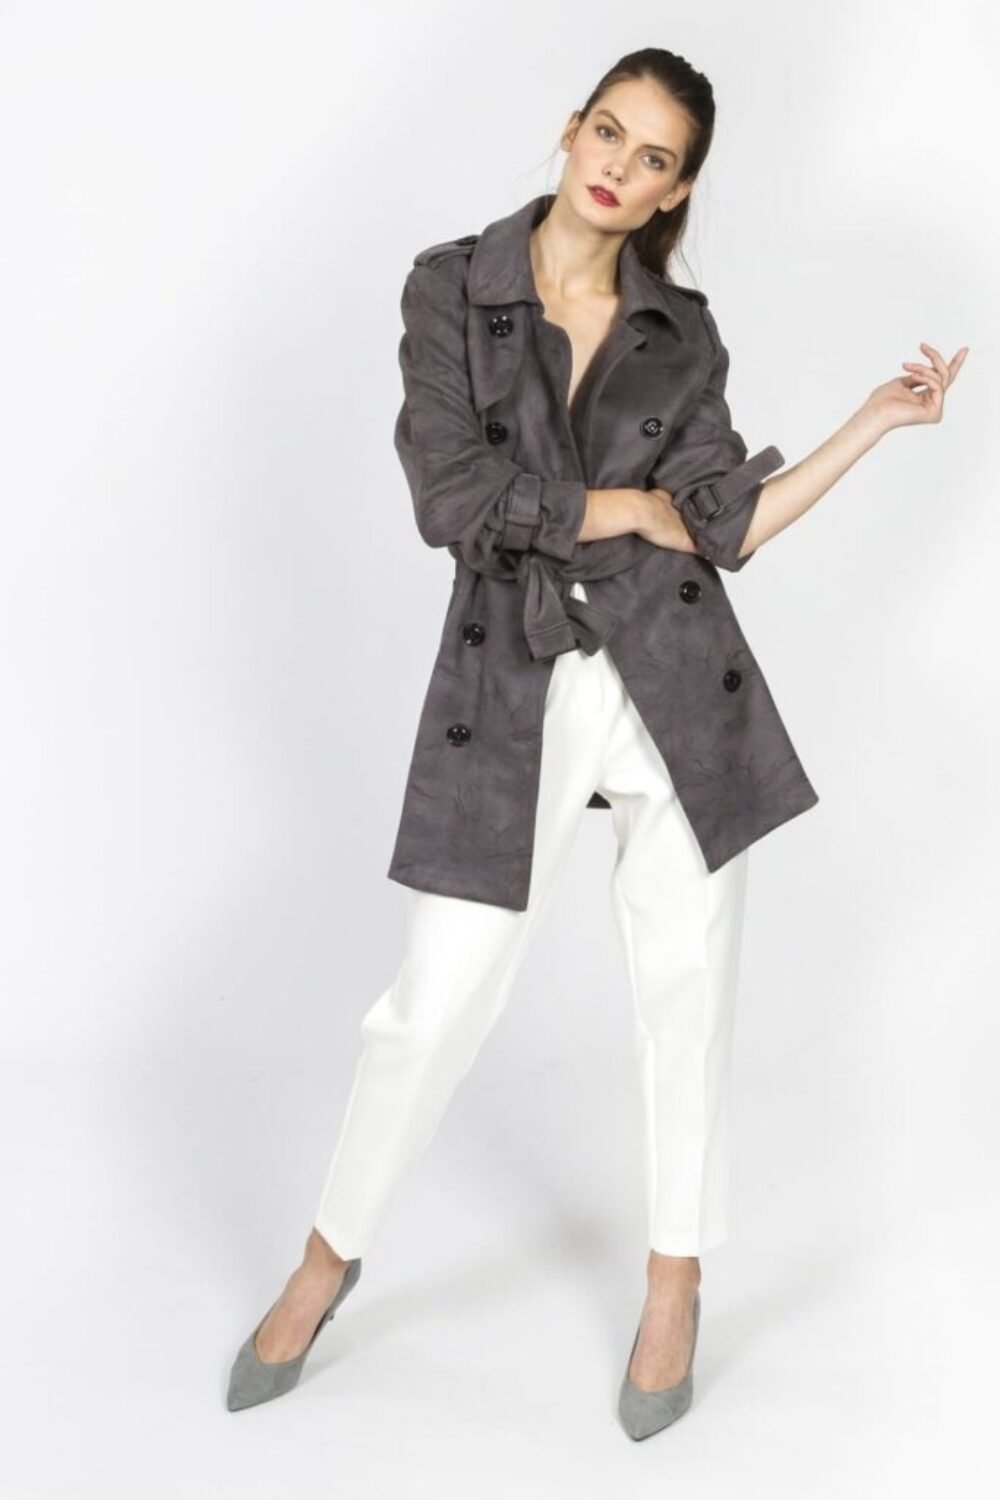 Shop Lux Grey Faux Suede Trench Coat and women's luxury and designer clothes at www.lux-apparel.co.uk